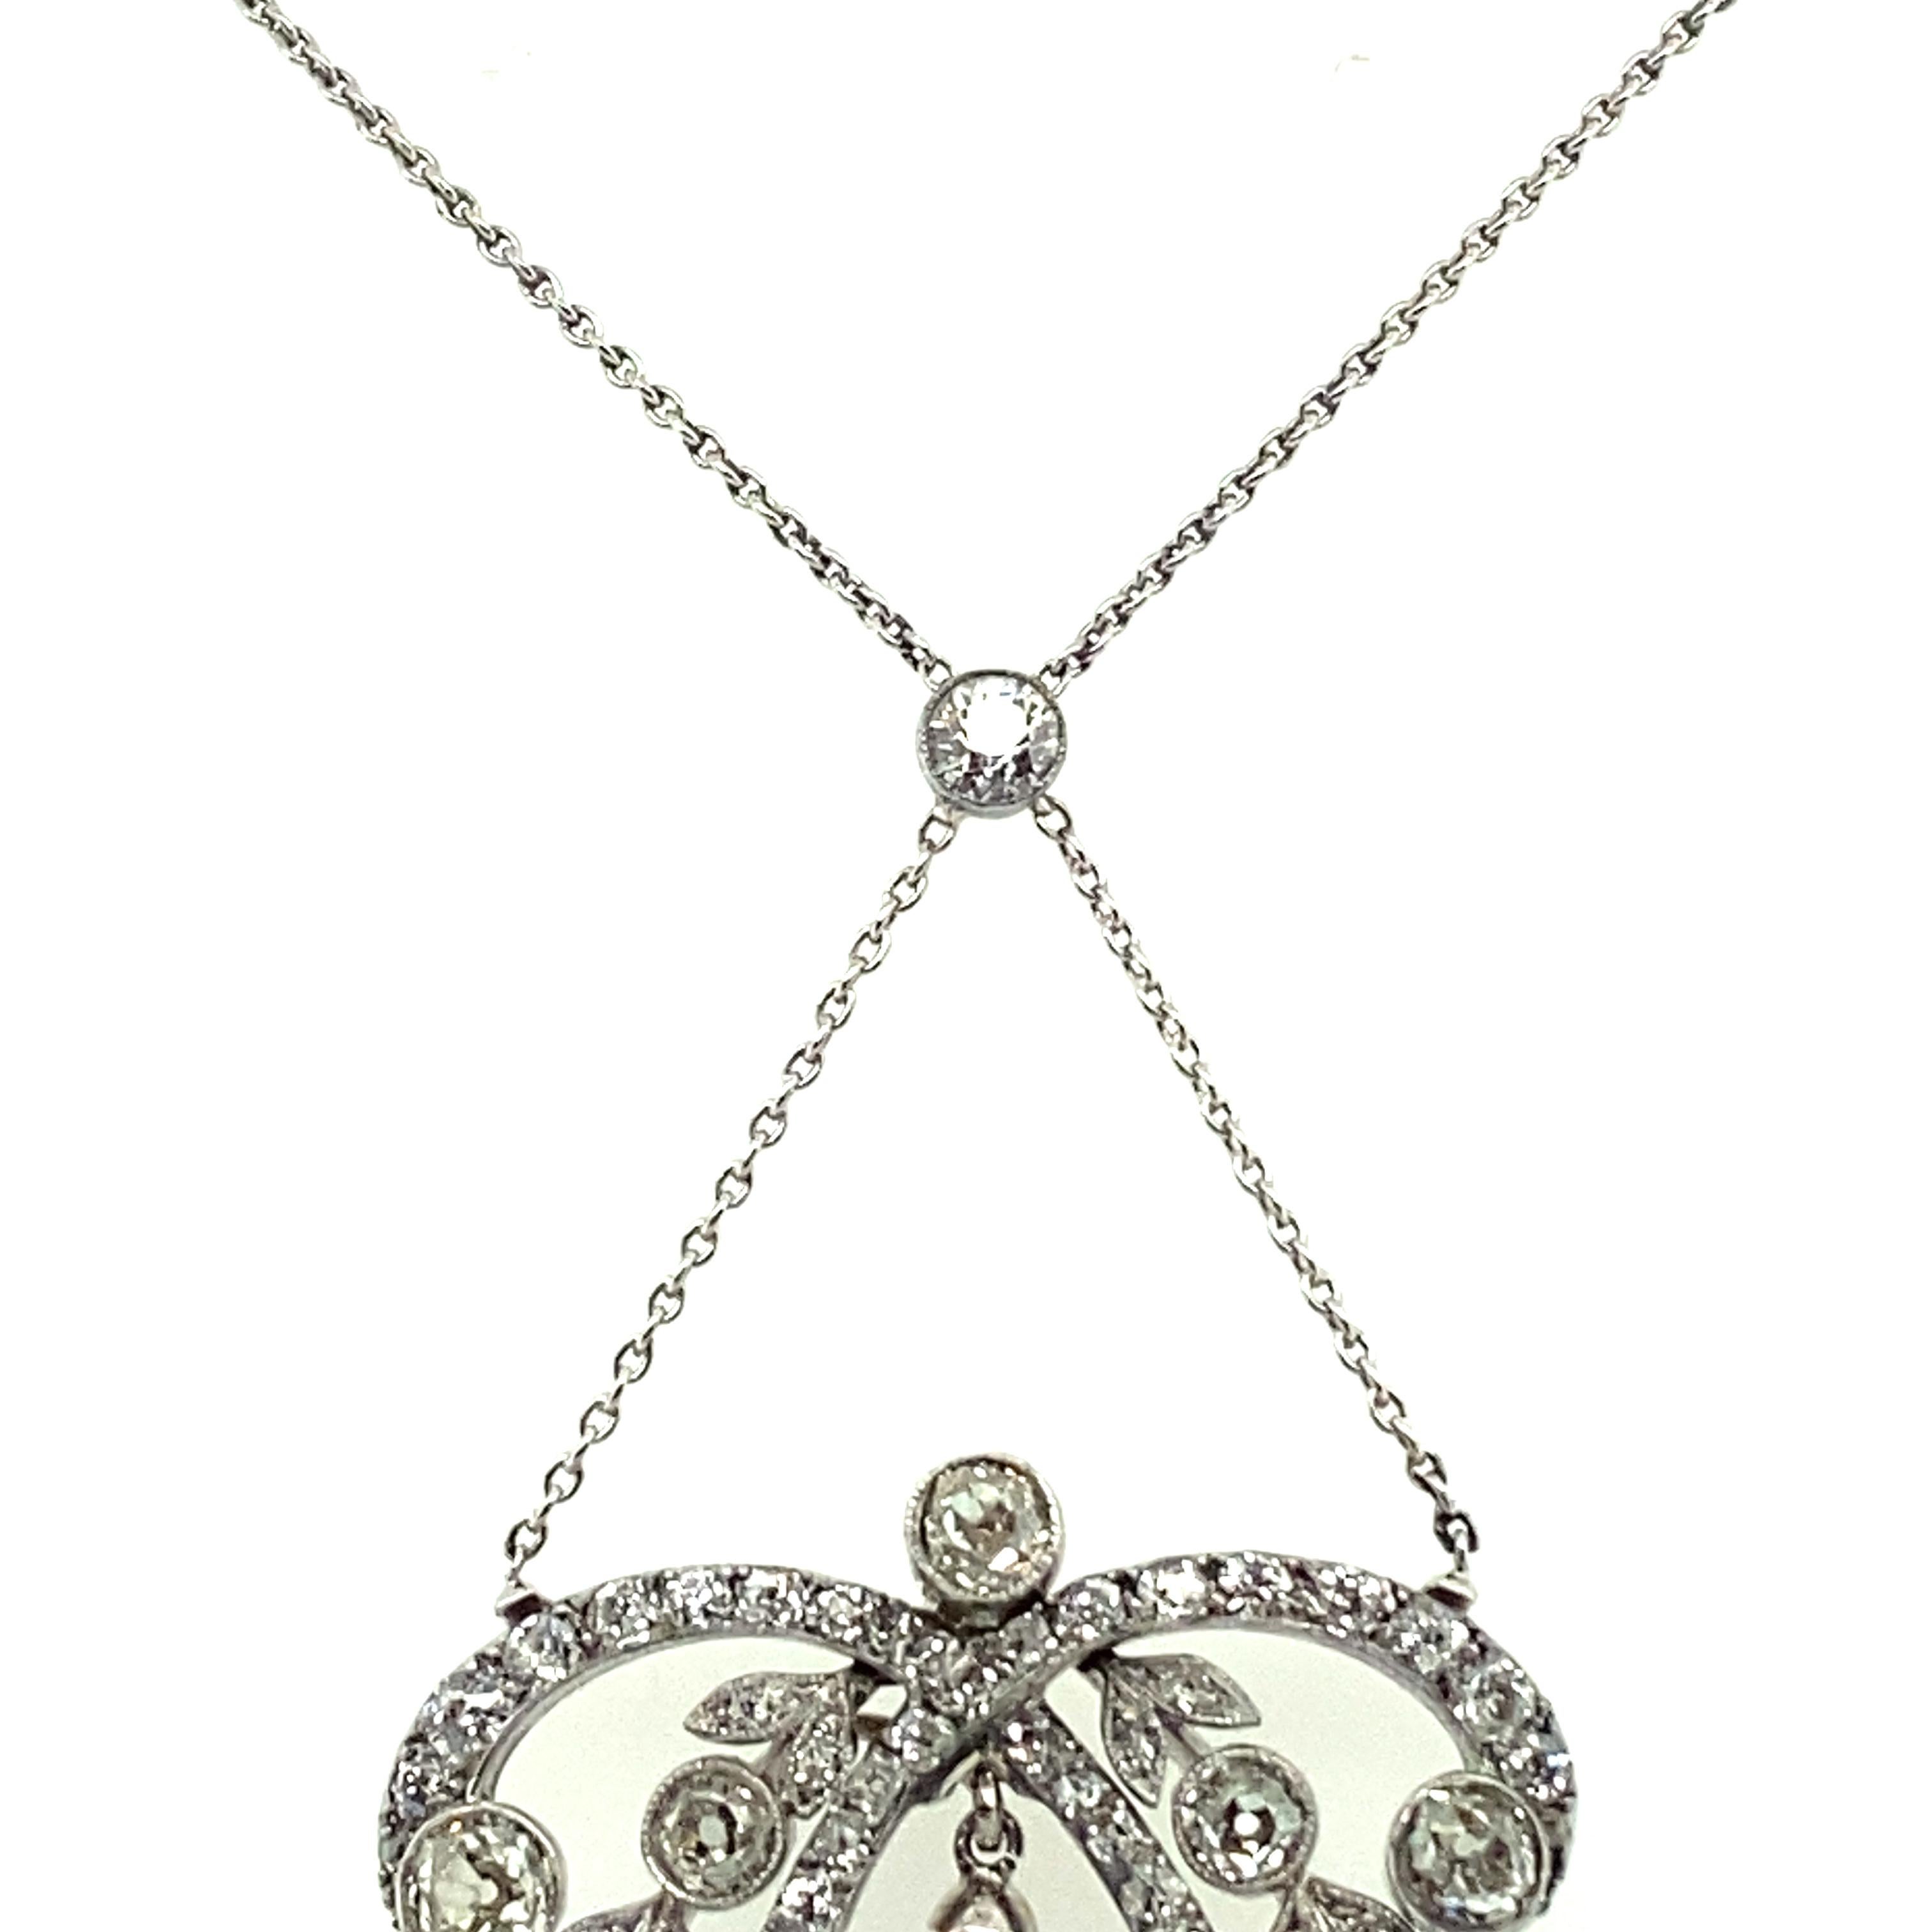 Unique Edwardian Natural Pearl and Diamond Necklace in Platinum 950 2